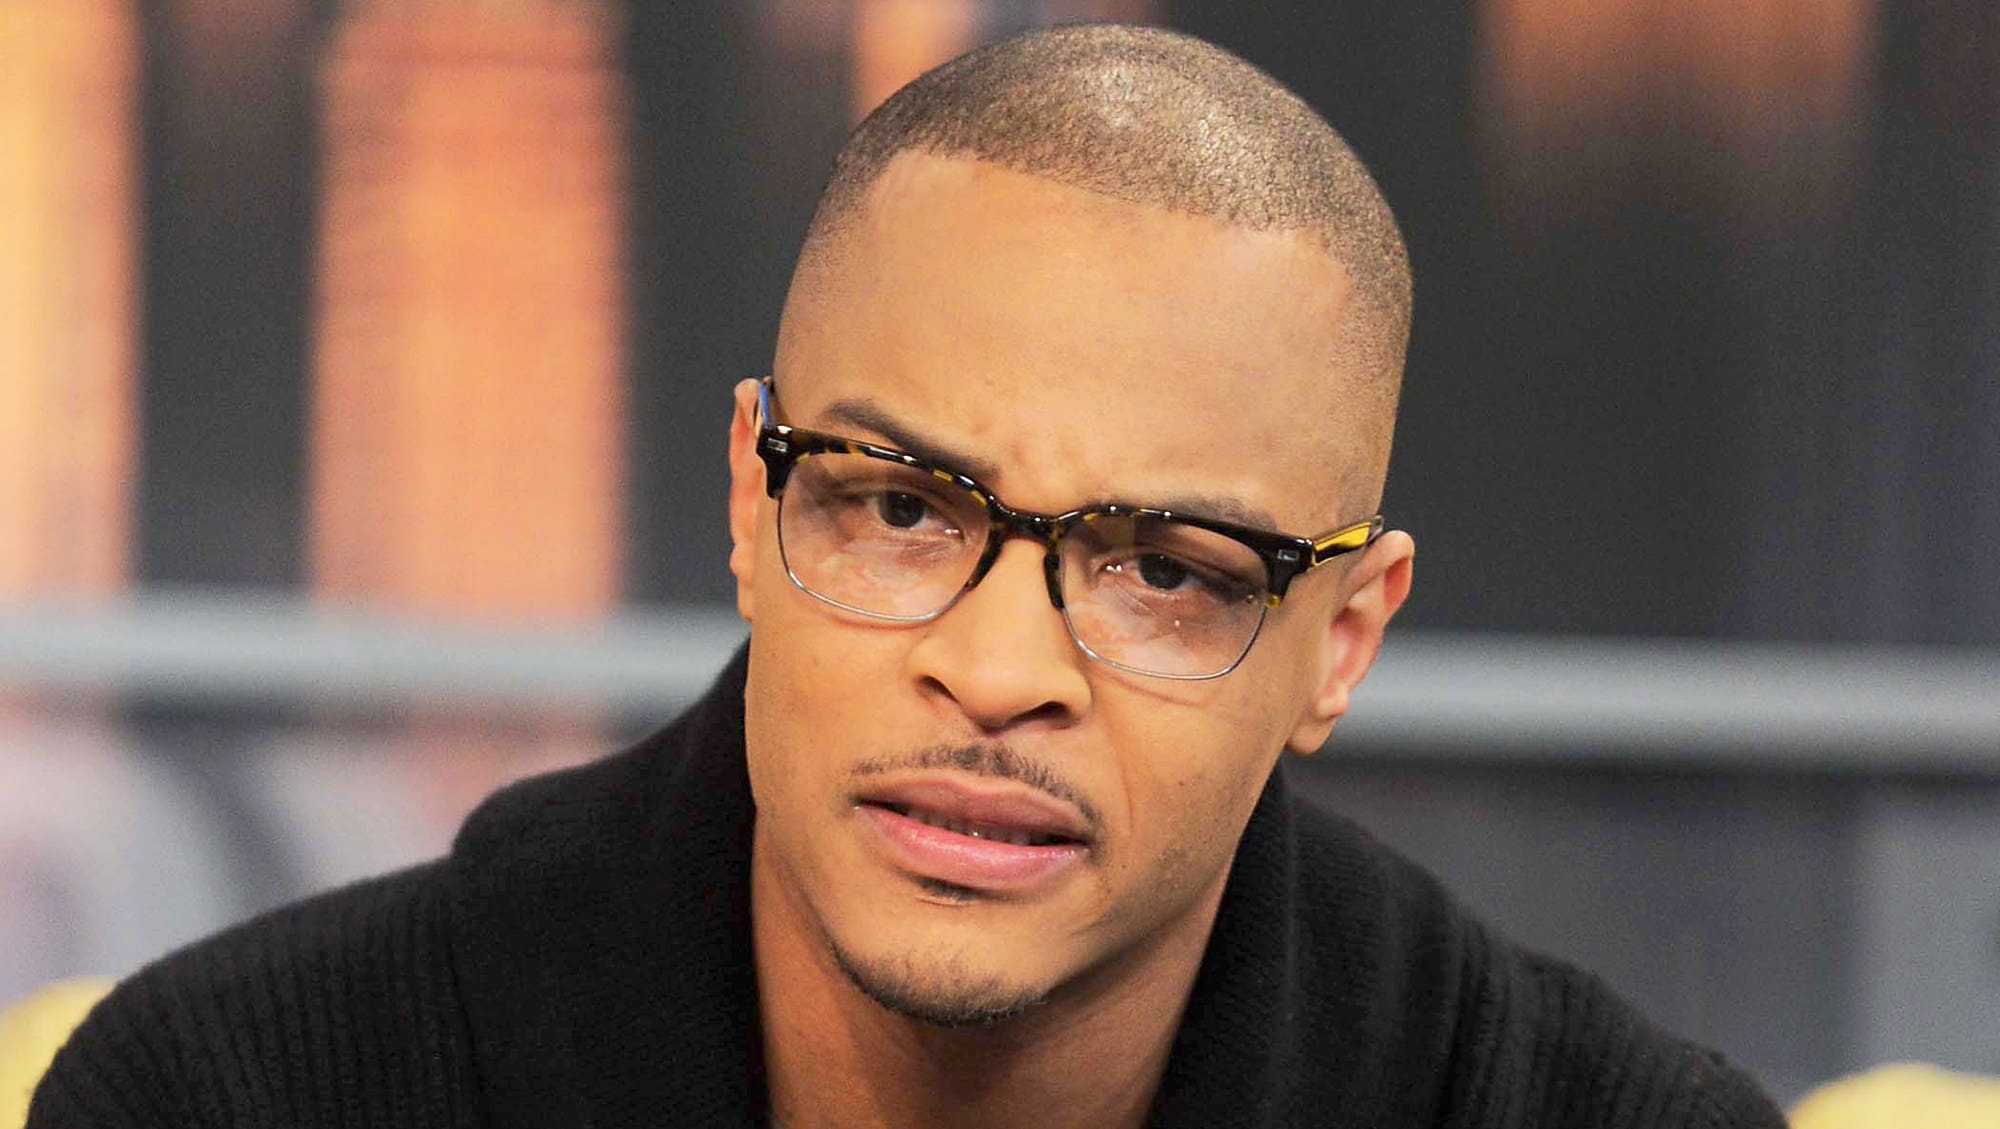 T.I. Makes Fans Angry And Outraged Following This Post